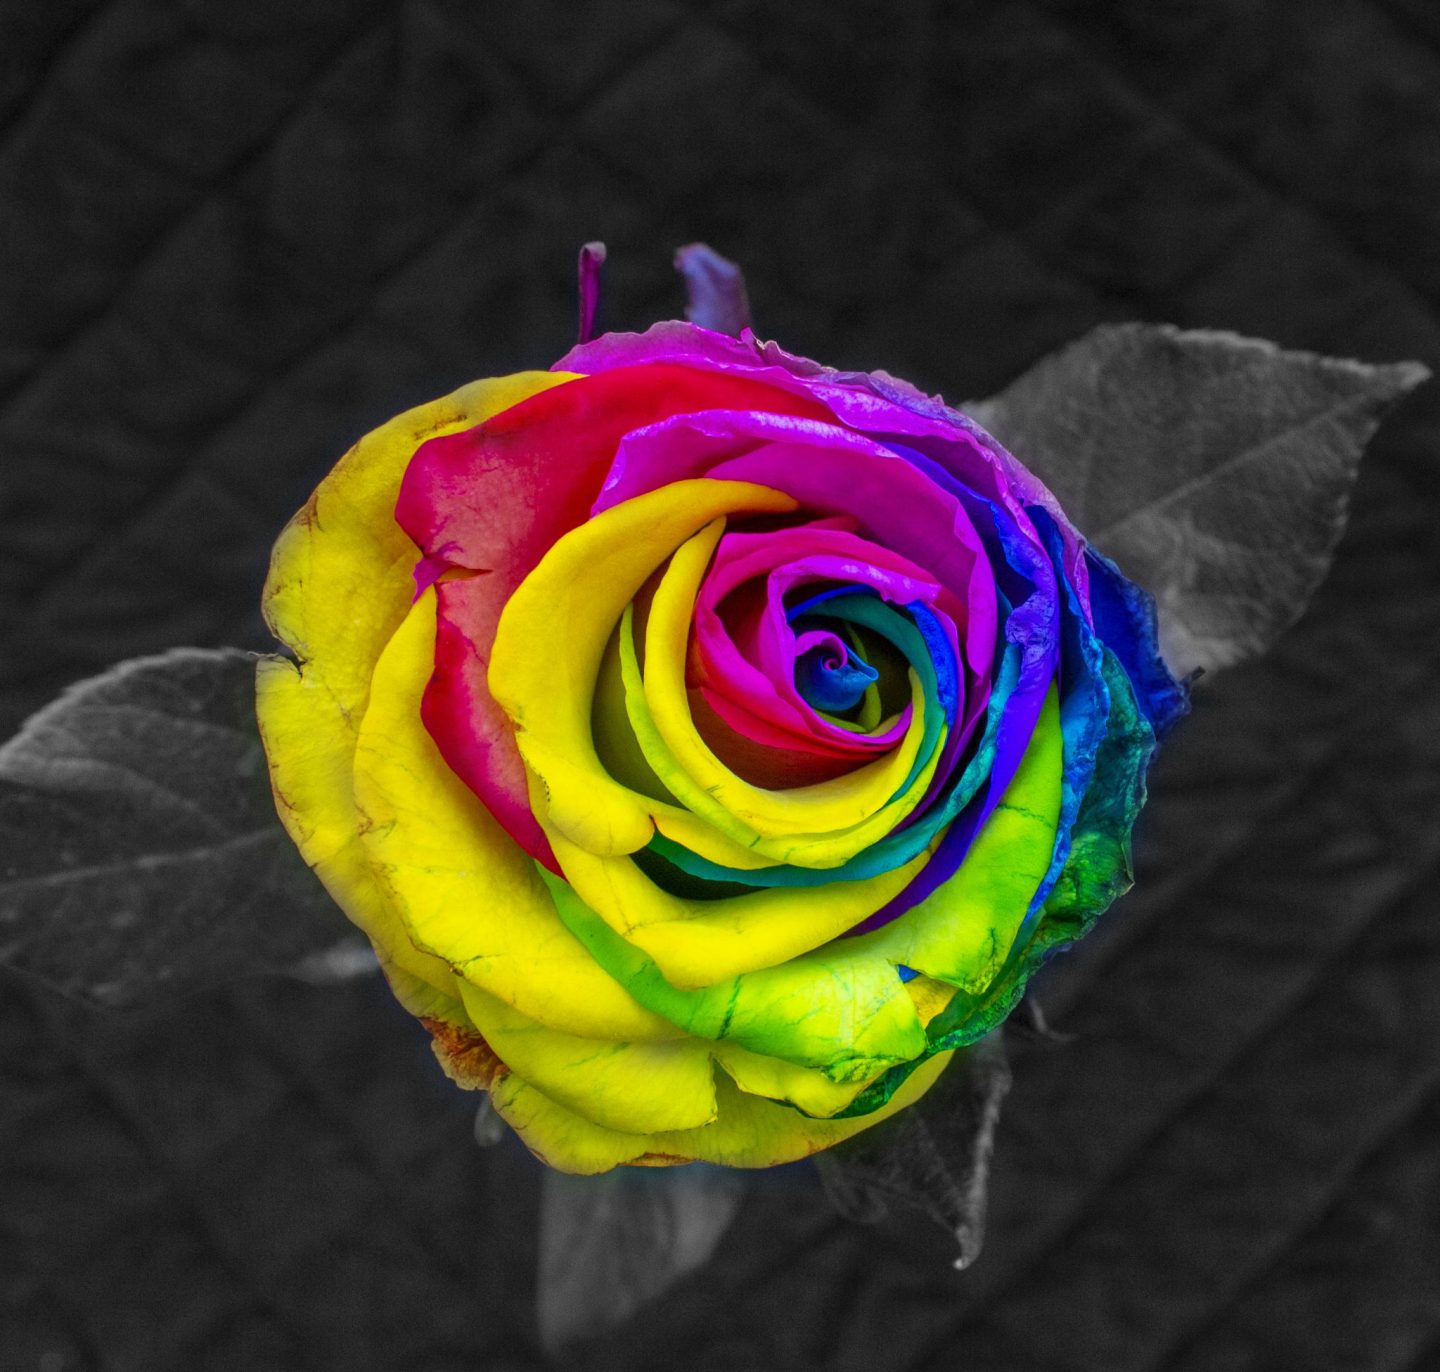 Rainbow rose, rose, Valentine's Day, floral photography, selective colour, flower photography, photography, dad blog, dadbloguk, dadbloguk.com, relationships